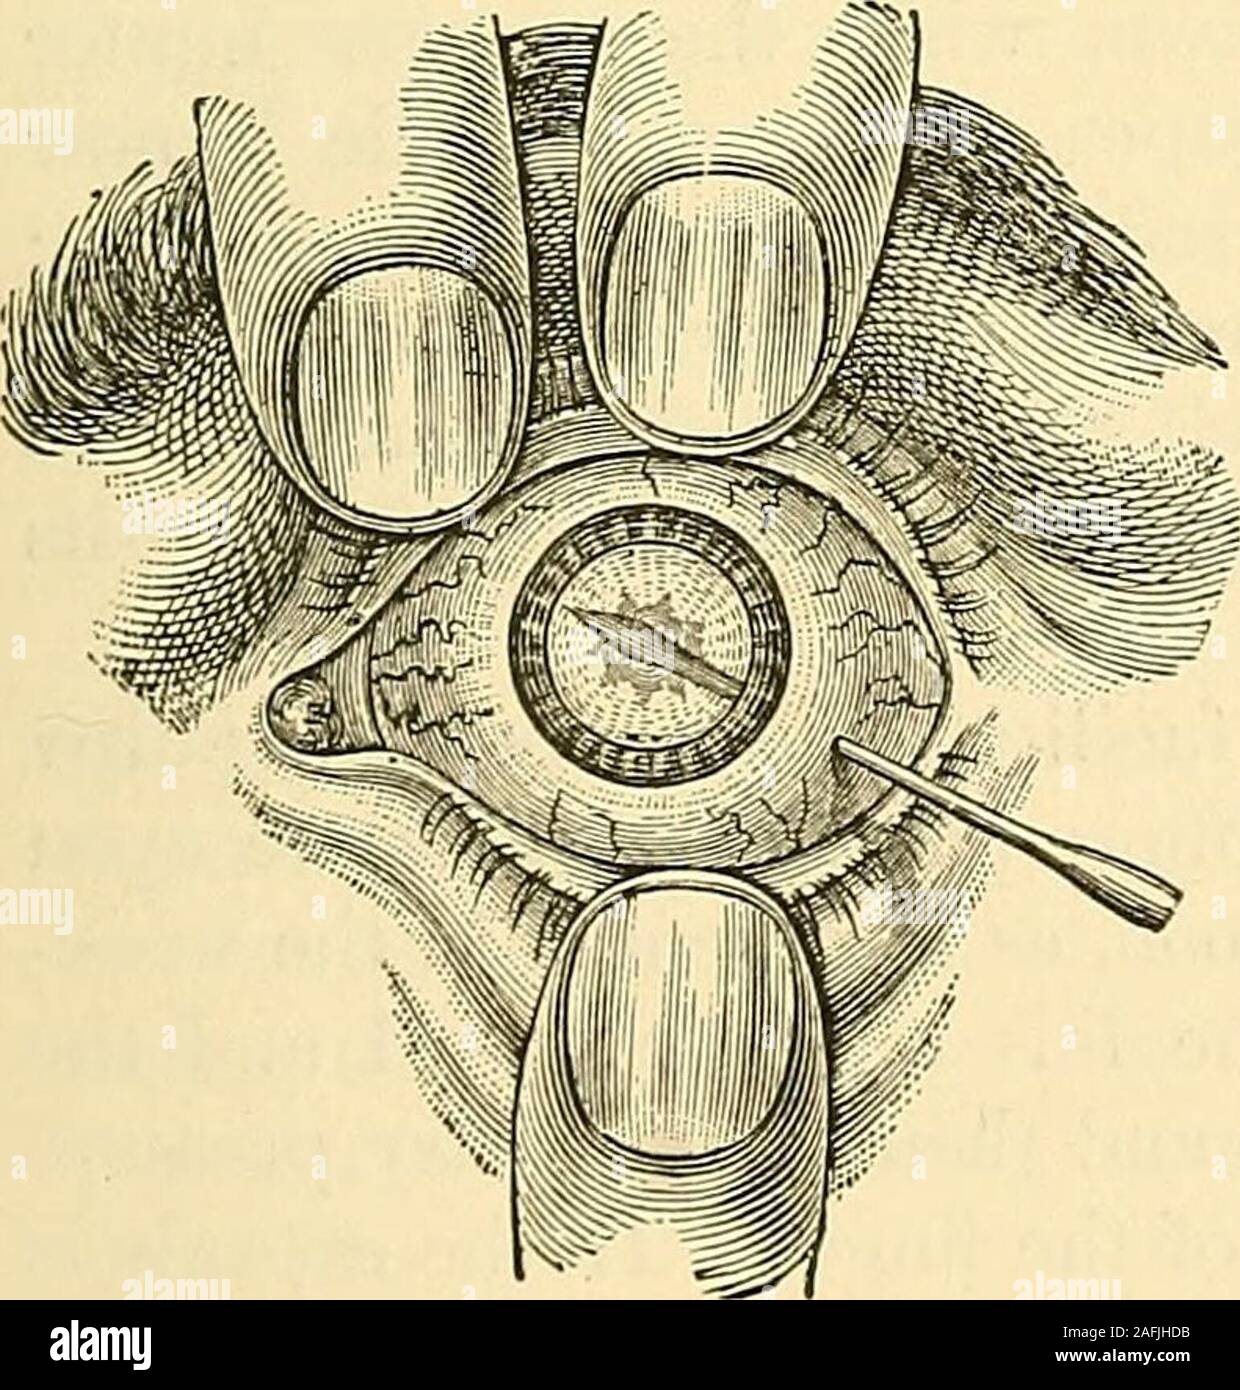 The principles and practice of surgery. ecially suited to cases in which  opaquedeposits upon the capsule may render it necessary to remove it from  theaxis of vision. A spear-shaped needle, after